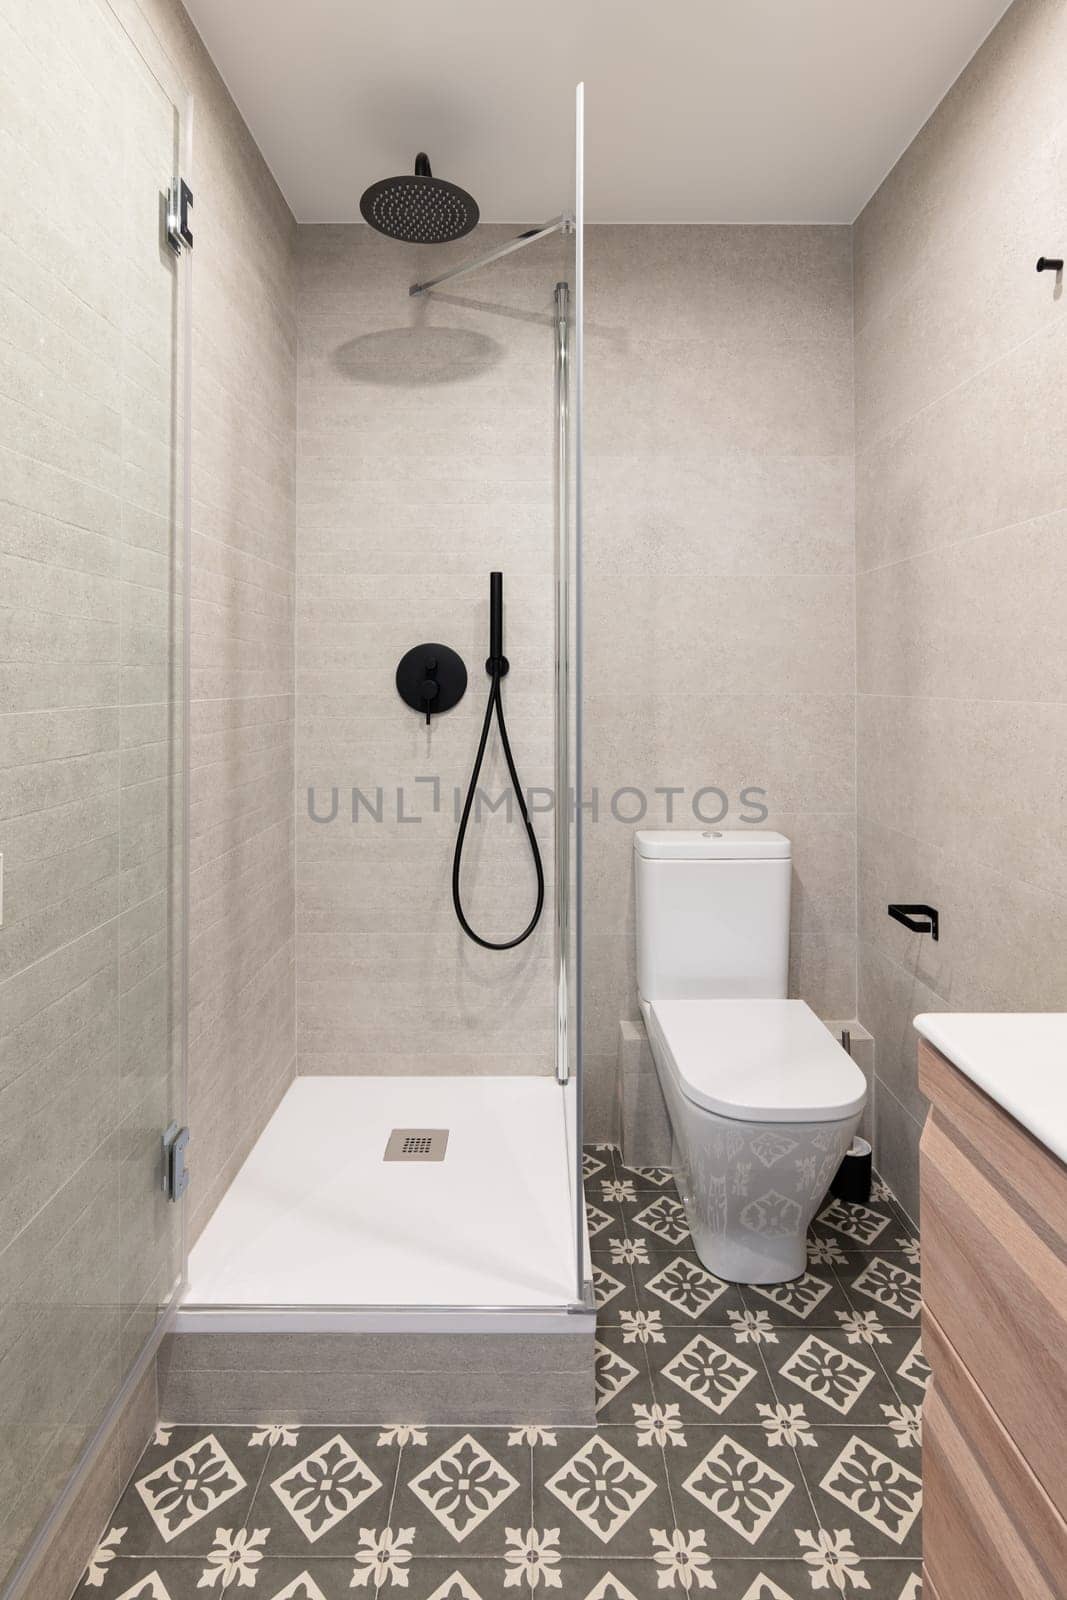 Stylish shower unit and ceramic toilet bowl in small bathroom. Modern equipment for hygiene in hotel room. Ideas for interior design